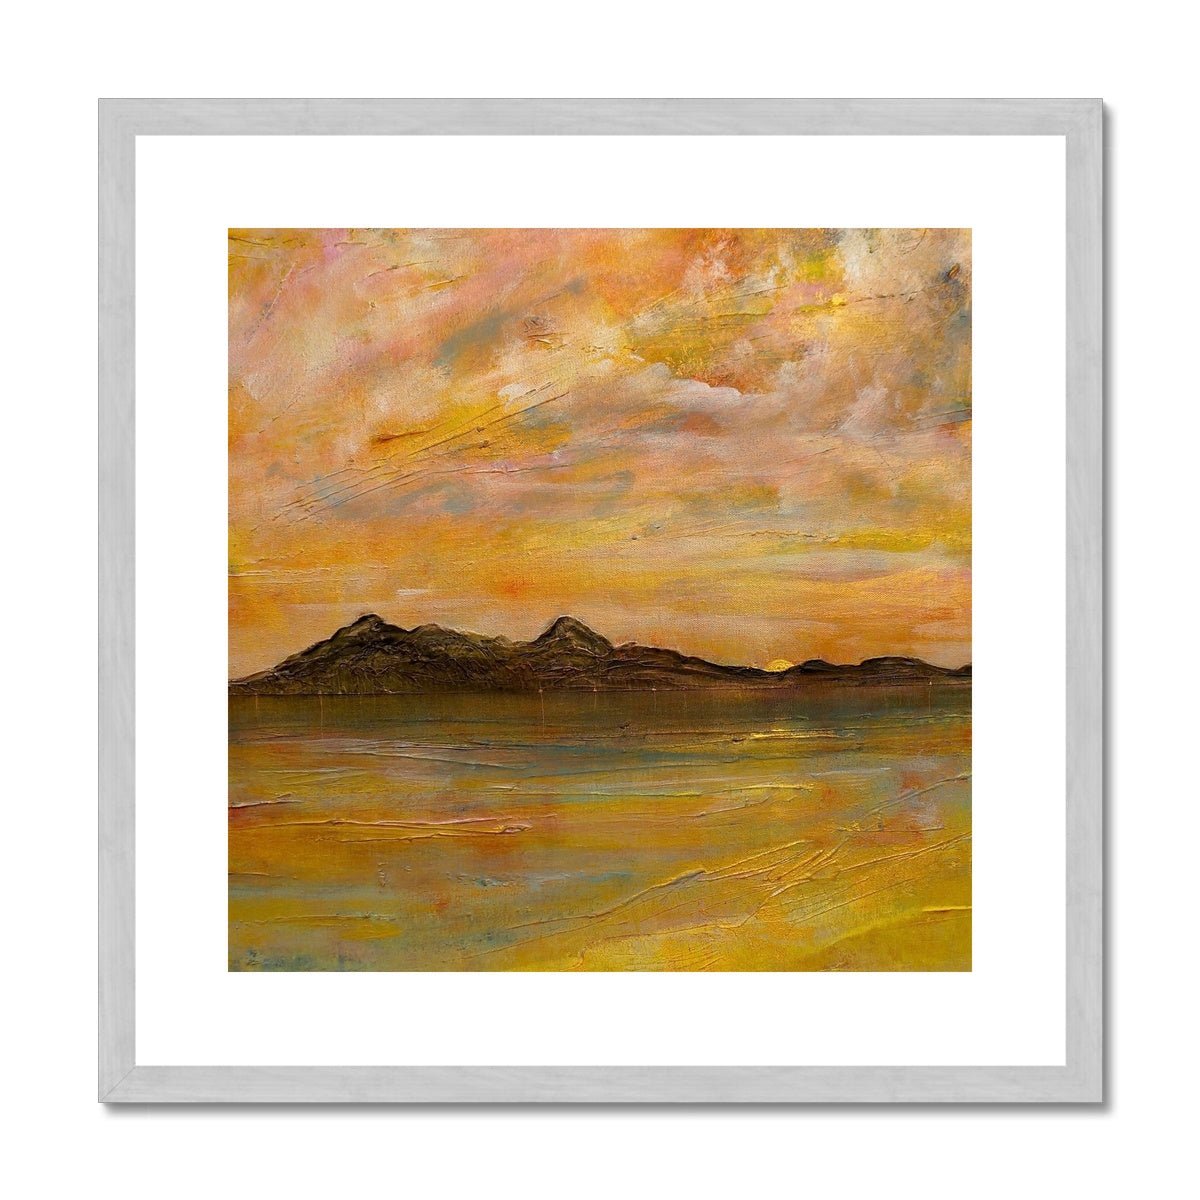 Arran Dusk Painting | Antique Framed & Mounted Prints From Scotland-Antique Framed & Mounted Prints-Arran Art Gallery-20"x20"-Silver Frame-Paintings, Prints, Homeware, Art Gifts From Scotland By Scottish Artist Kevin Hunter